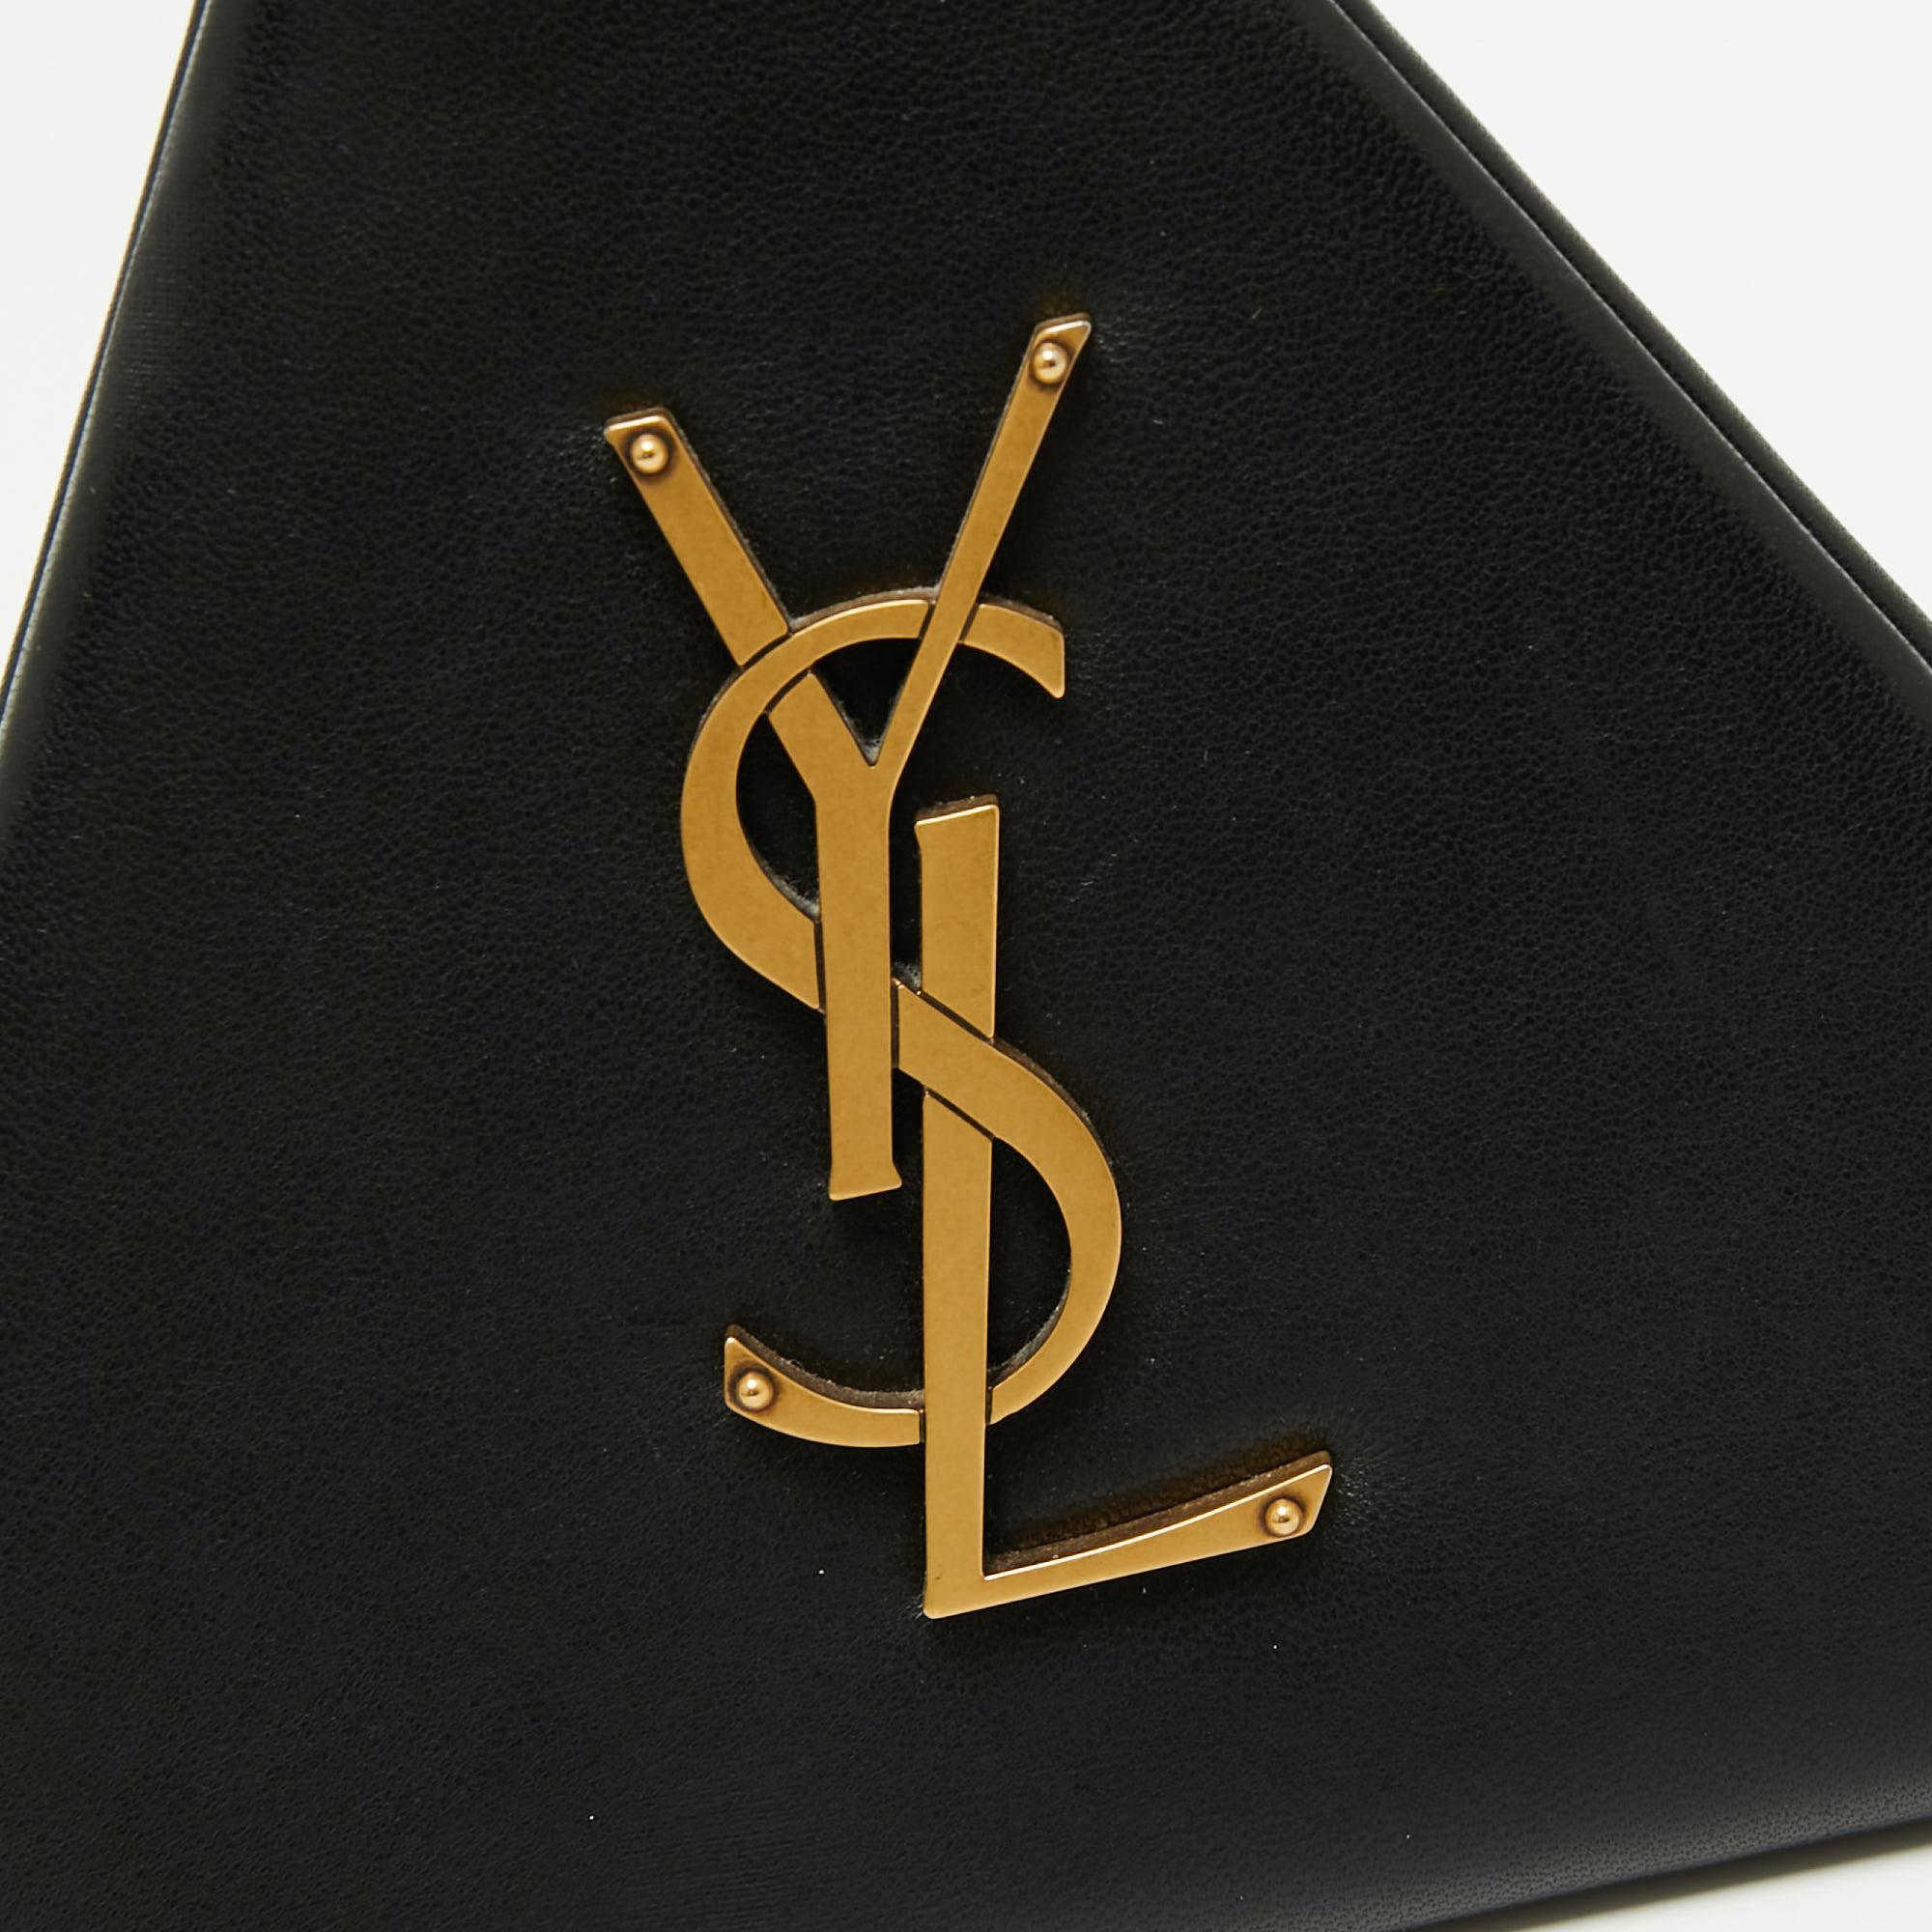 This beautiful wristlet clutch from Saint Laurent is just the right party piece! It is made from black leather and has an amazing pyramid box shape that adds to its striking appeal. It is complete with a gold-tone YSL logo on the front and has a